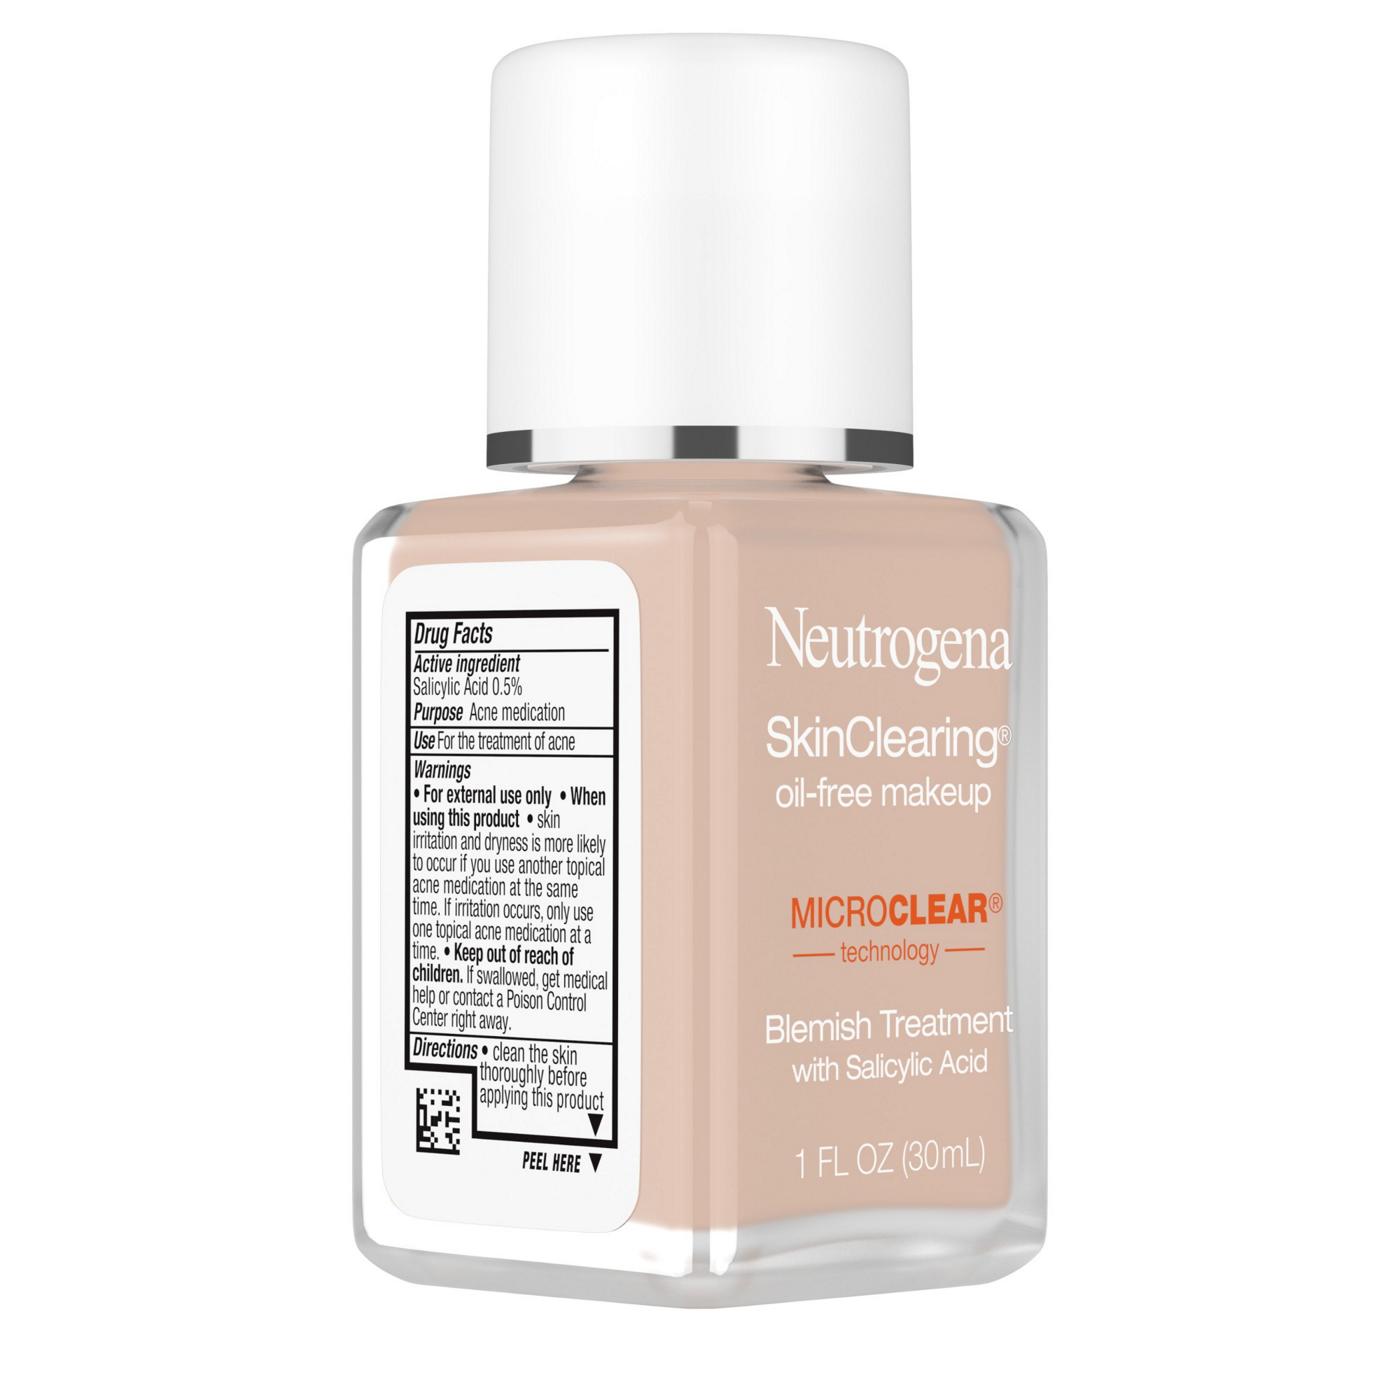 Neutrogena SkinClearing 20 Natural Ivory Oil-Free Makeup; image 5 of 8